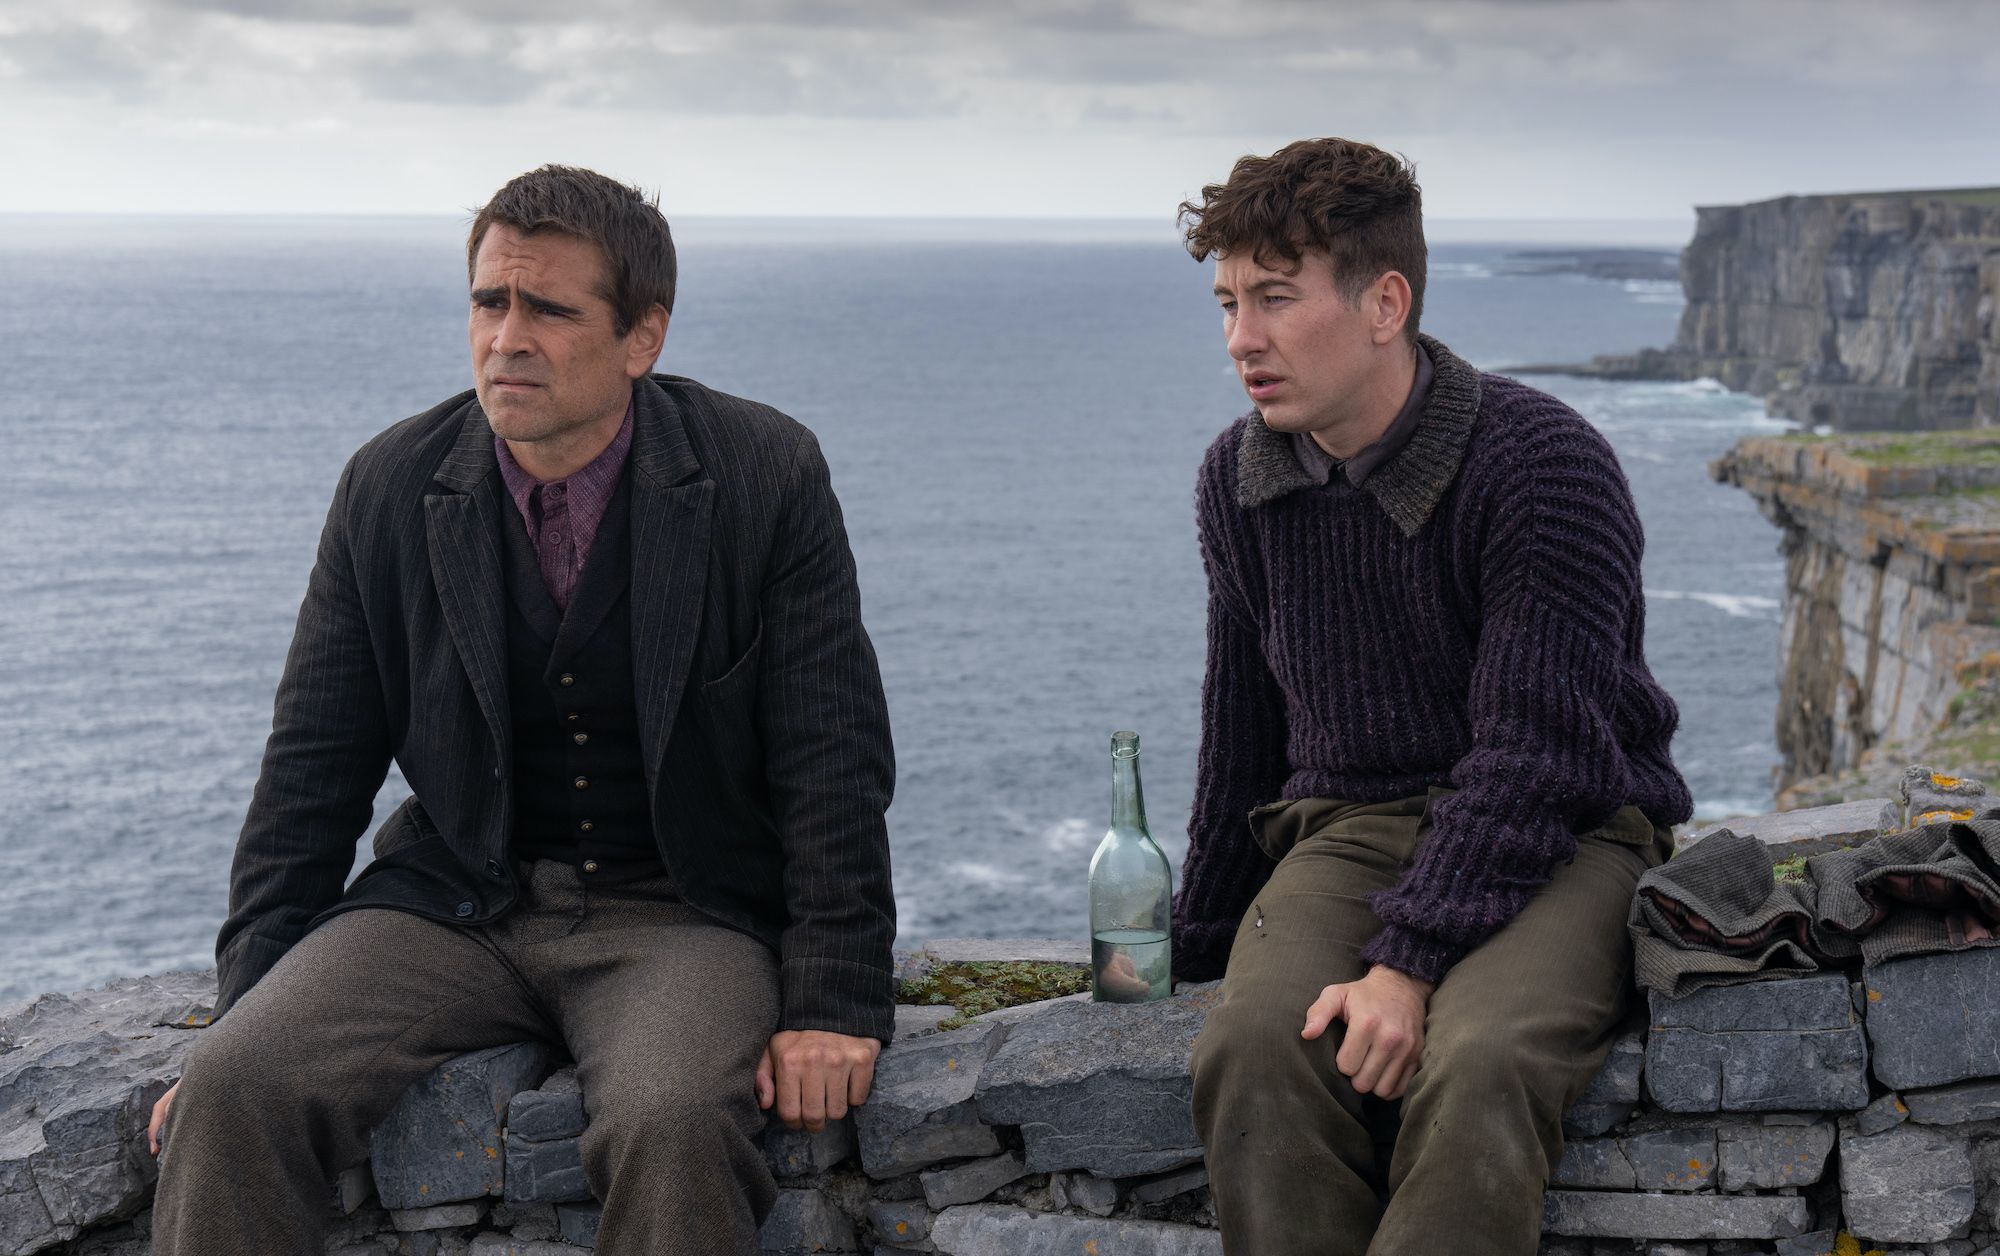 colin farrell and barry keoghan in the film the banshees of inisherin photo by jonathan hession courtesy of searchlight pictures © 2022 20th century studios all rights reserved